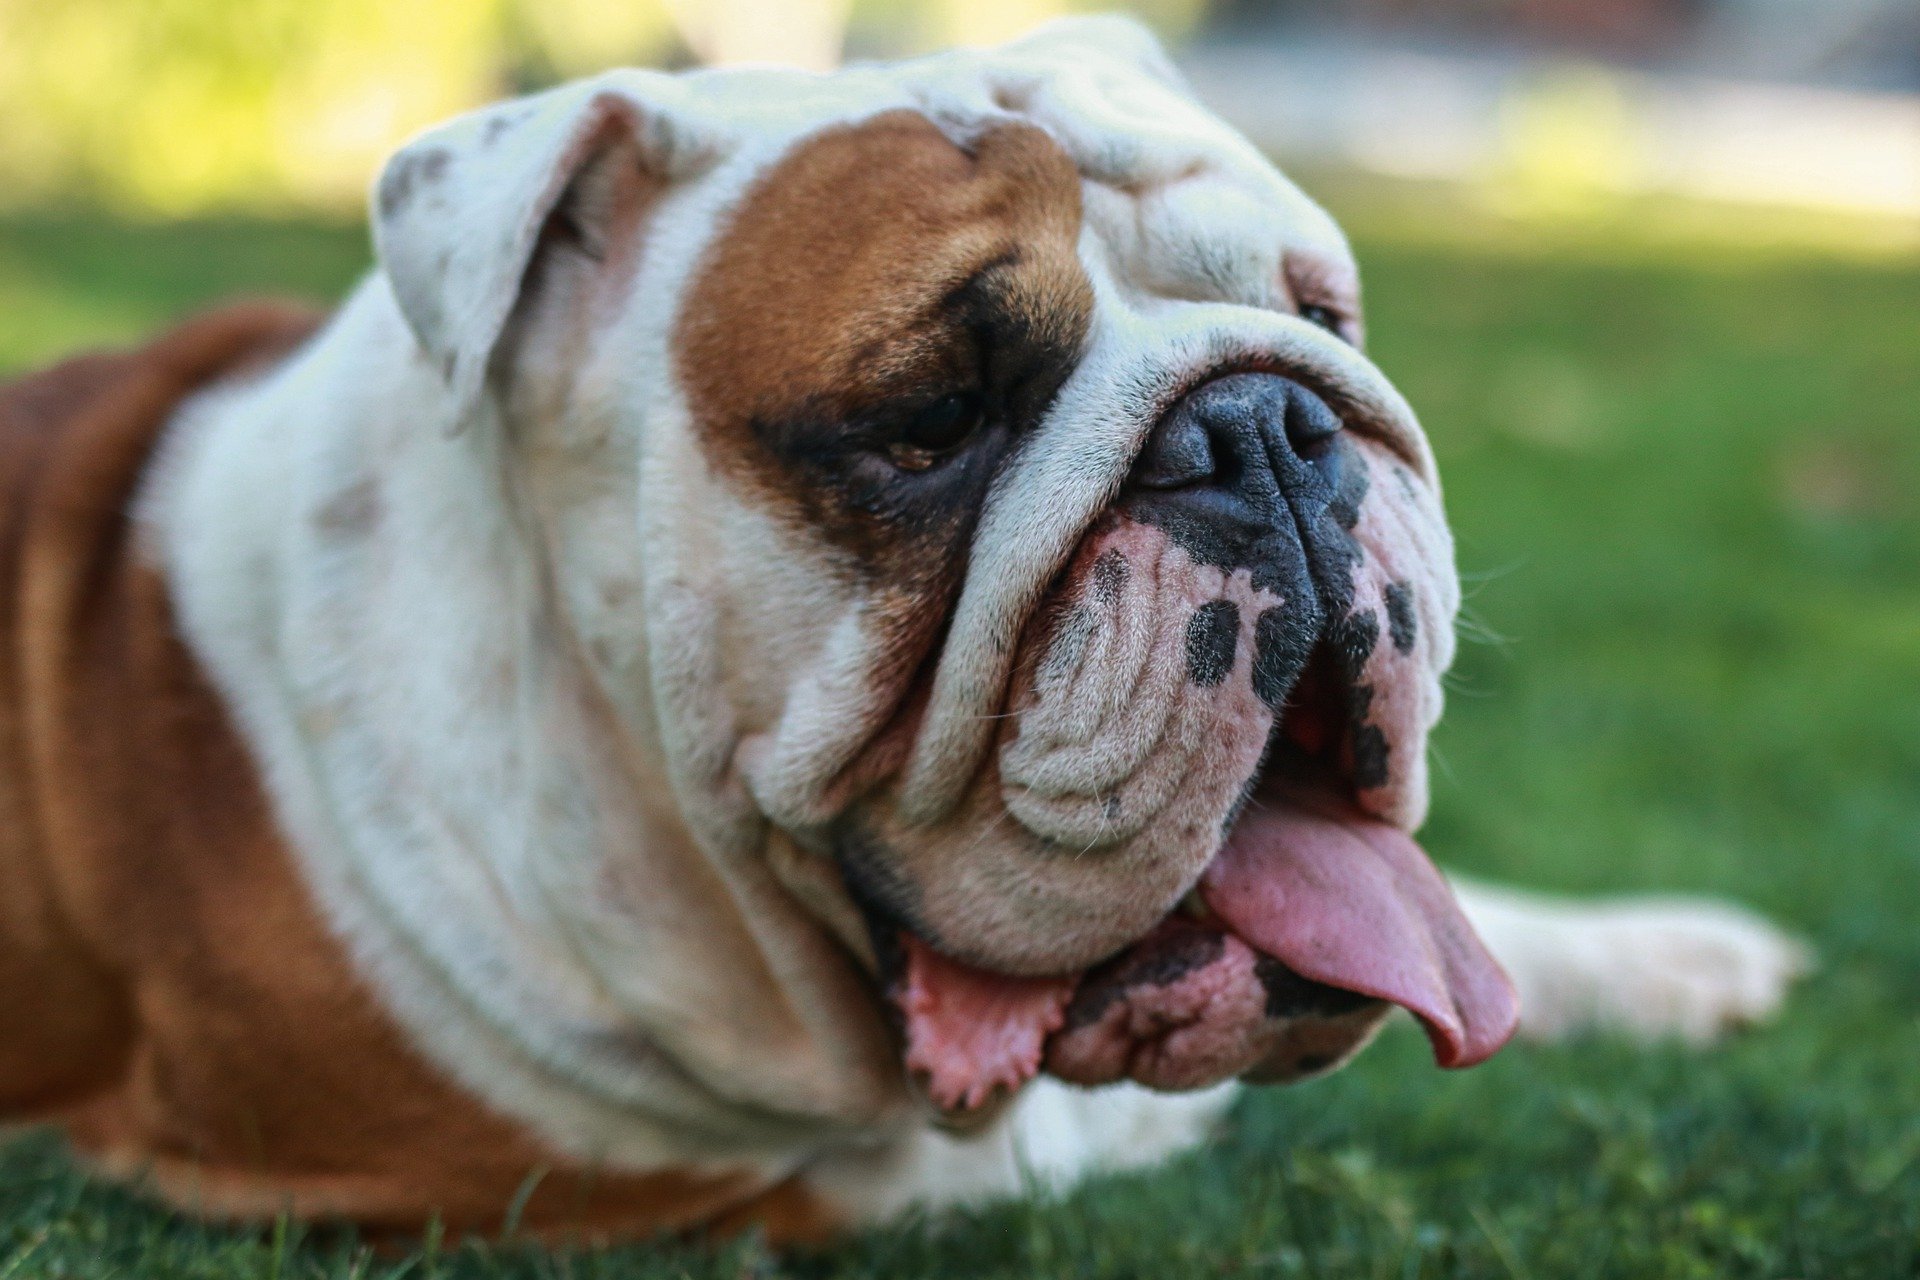 Bulldogs and Cavalier King Charles spaniels are two of the most popular dog breeds in the United States.